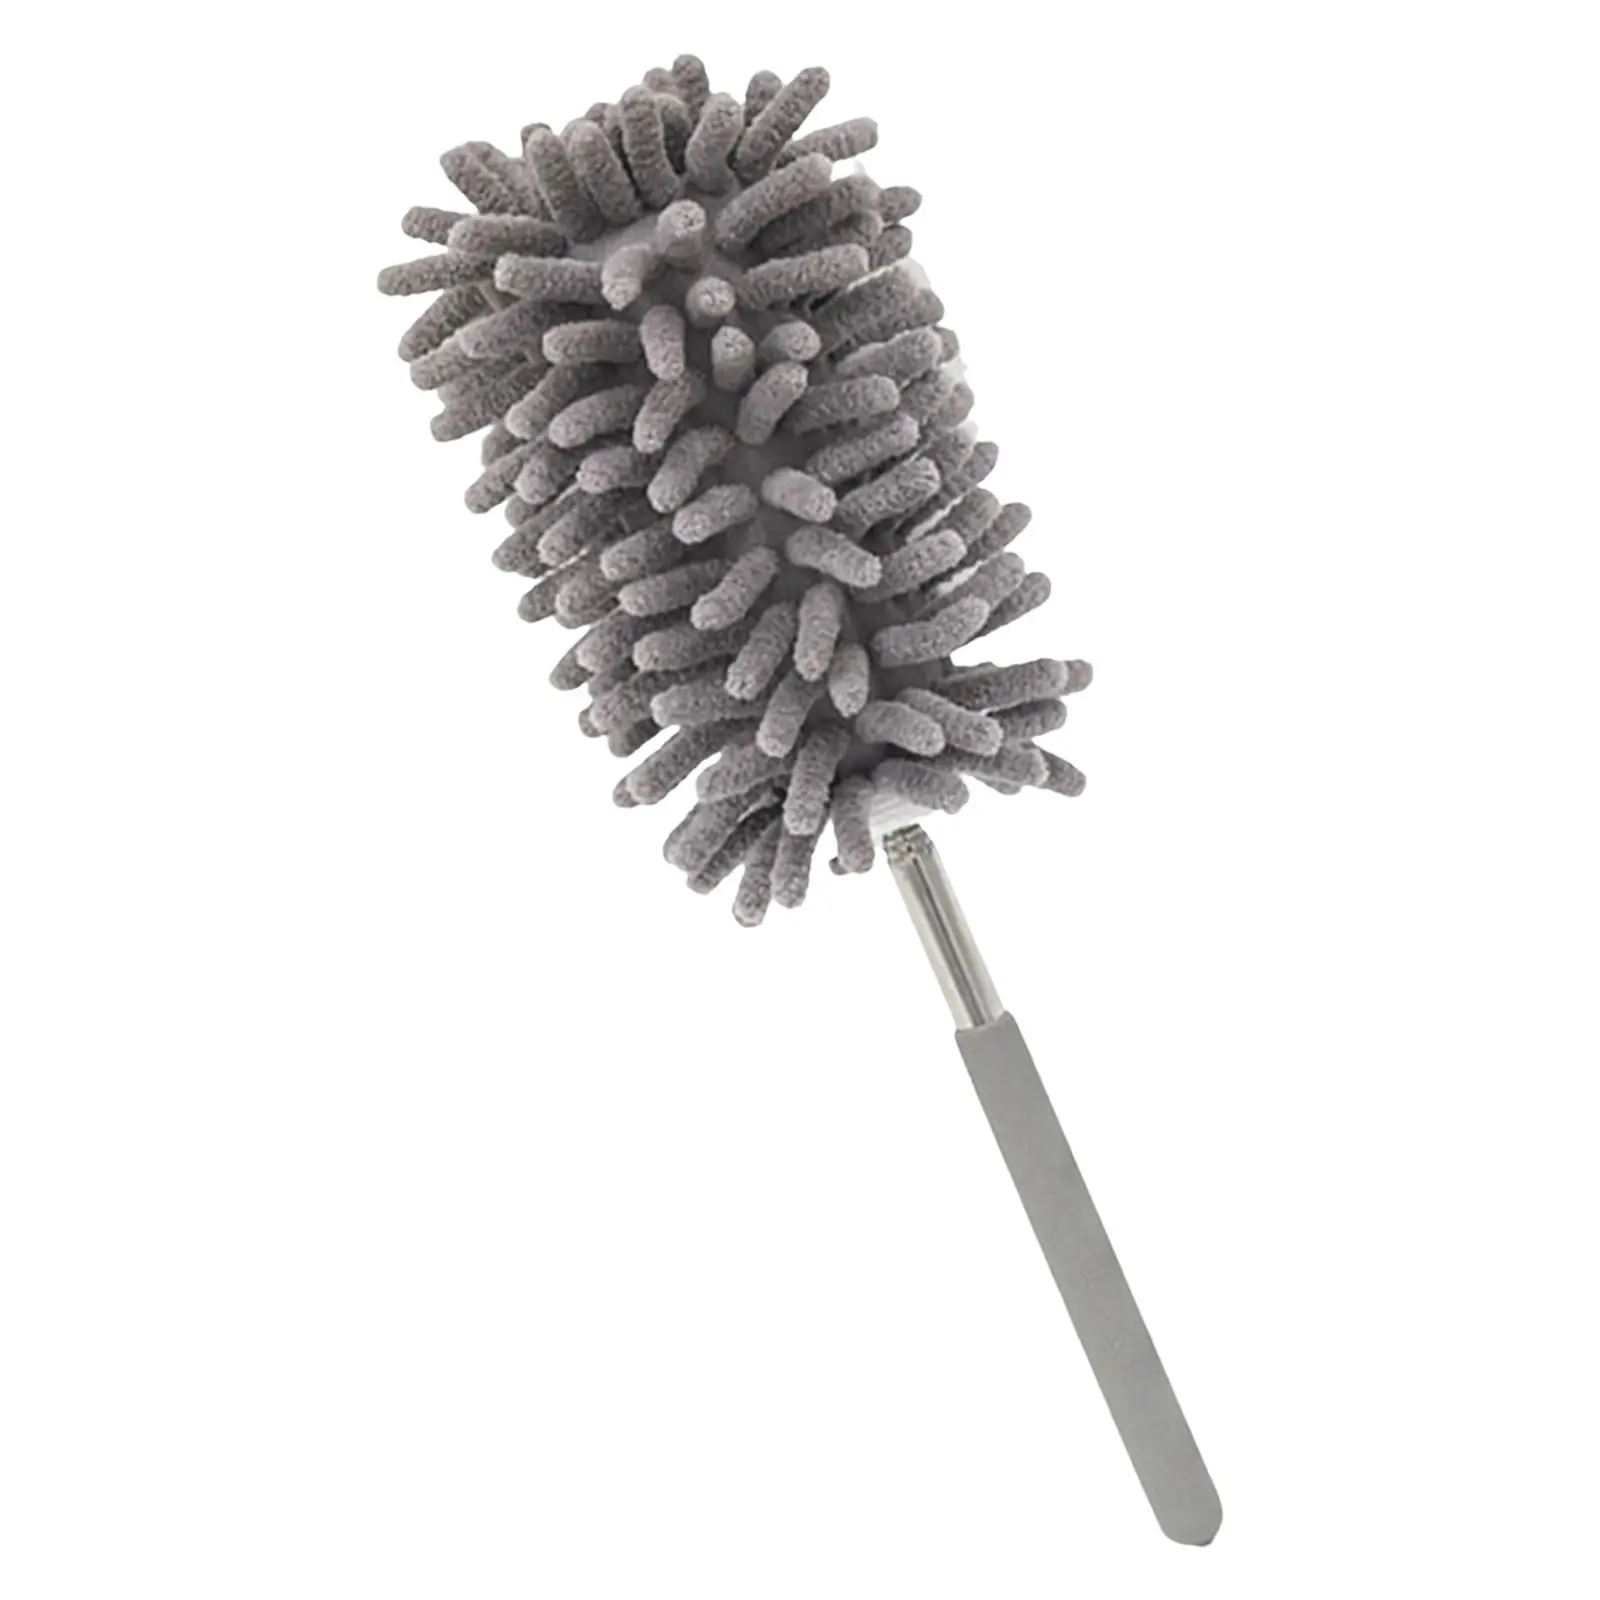 Dust Cleaner, Housework Cleaning Washable Dust Cleaner Dusting Brush Household Duster Household Cleaning, for Car Kitchen Office